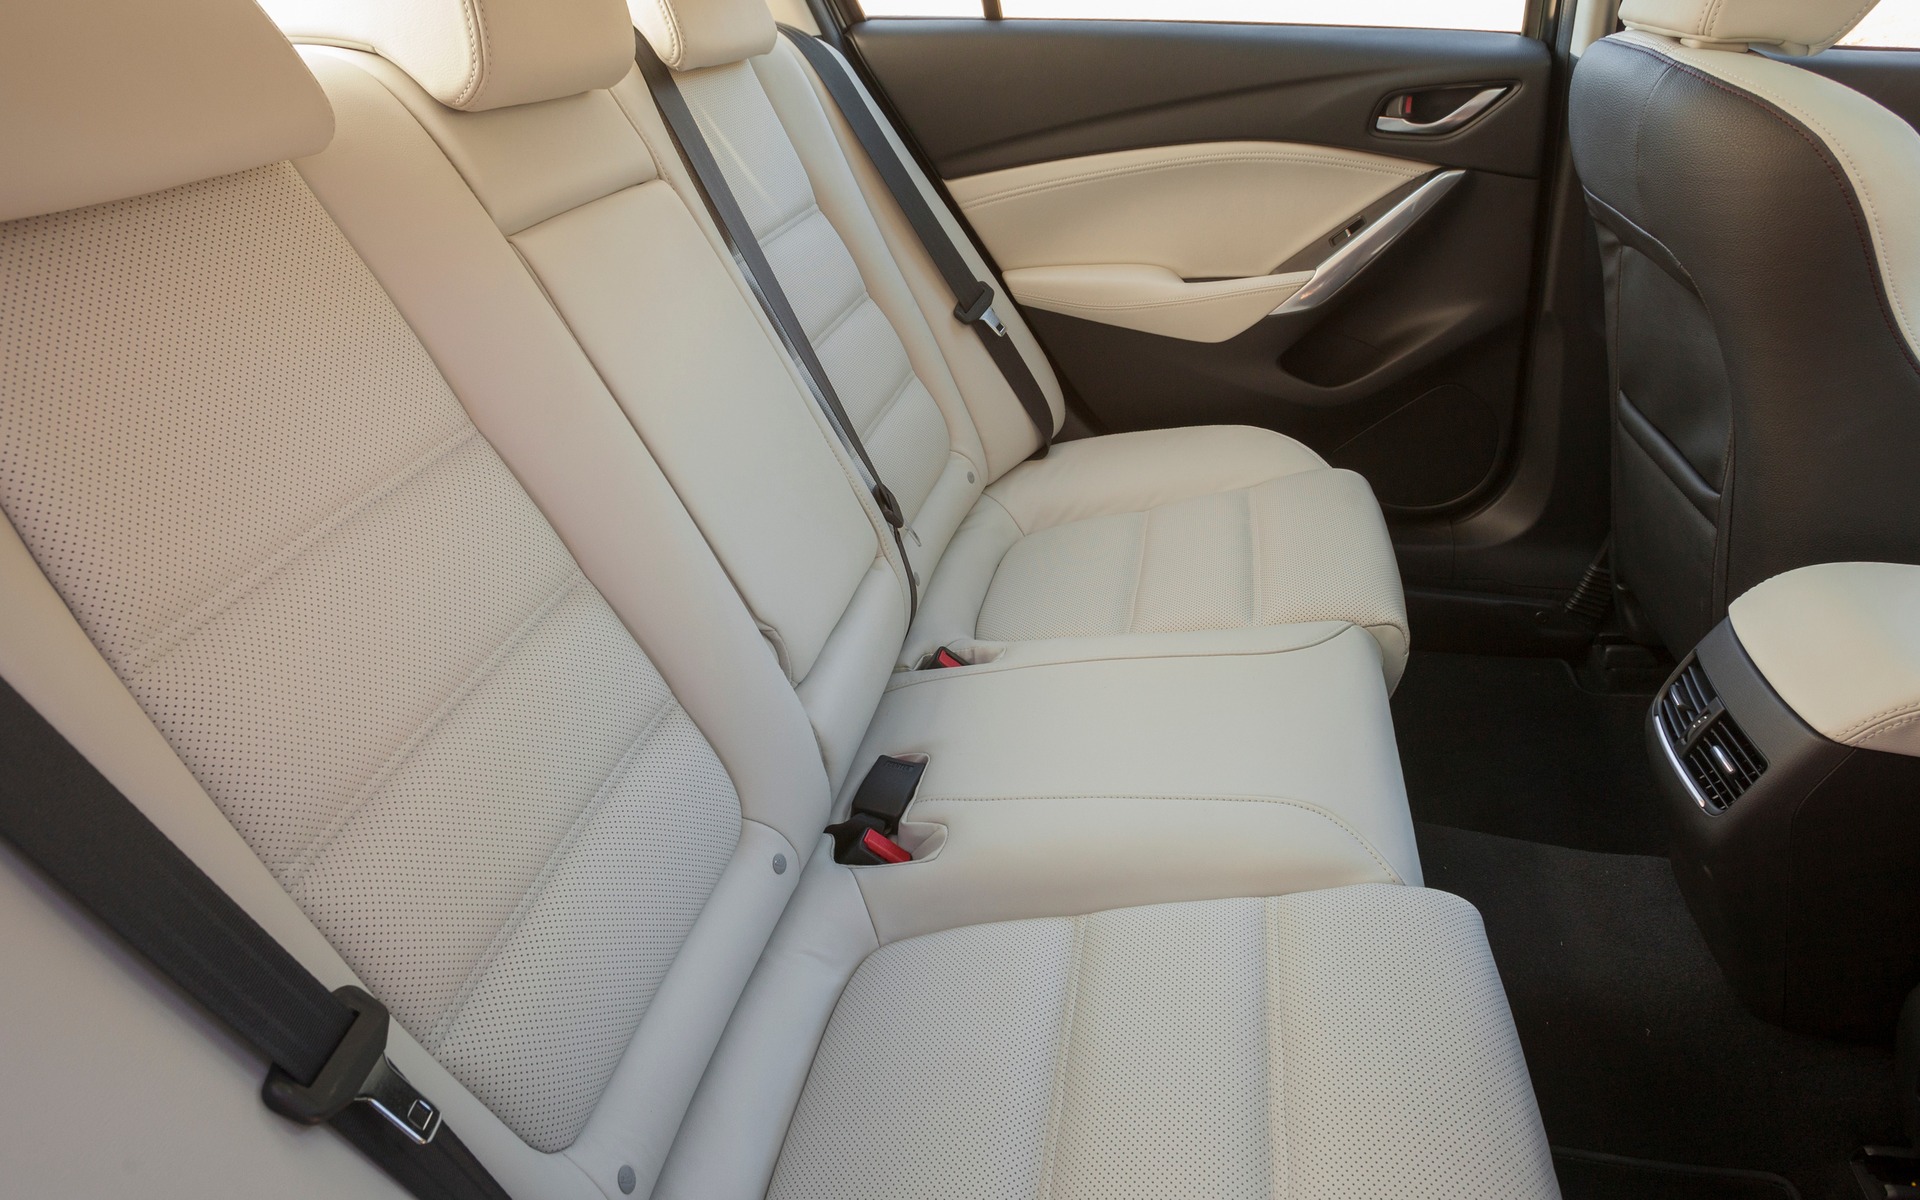 A roomy rear seat greets second row riders.